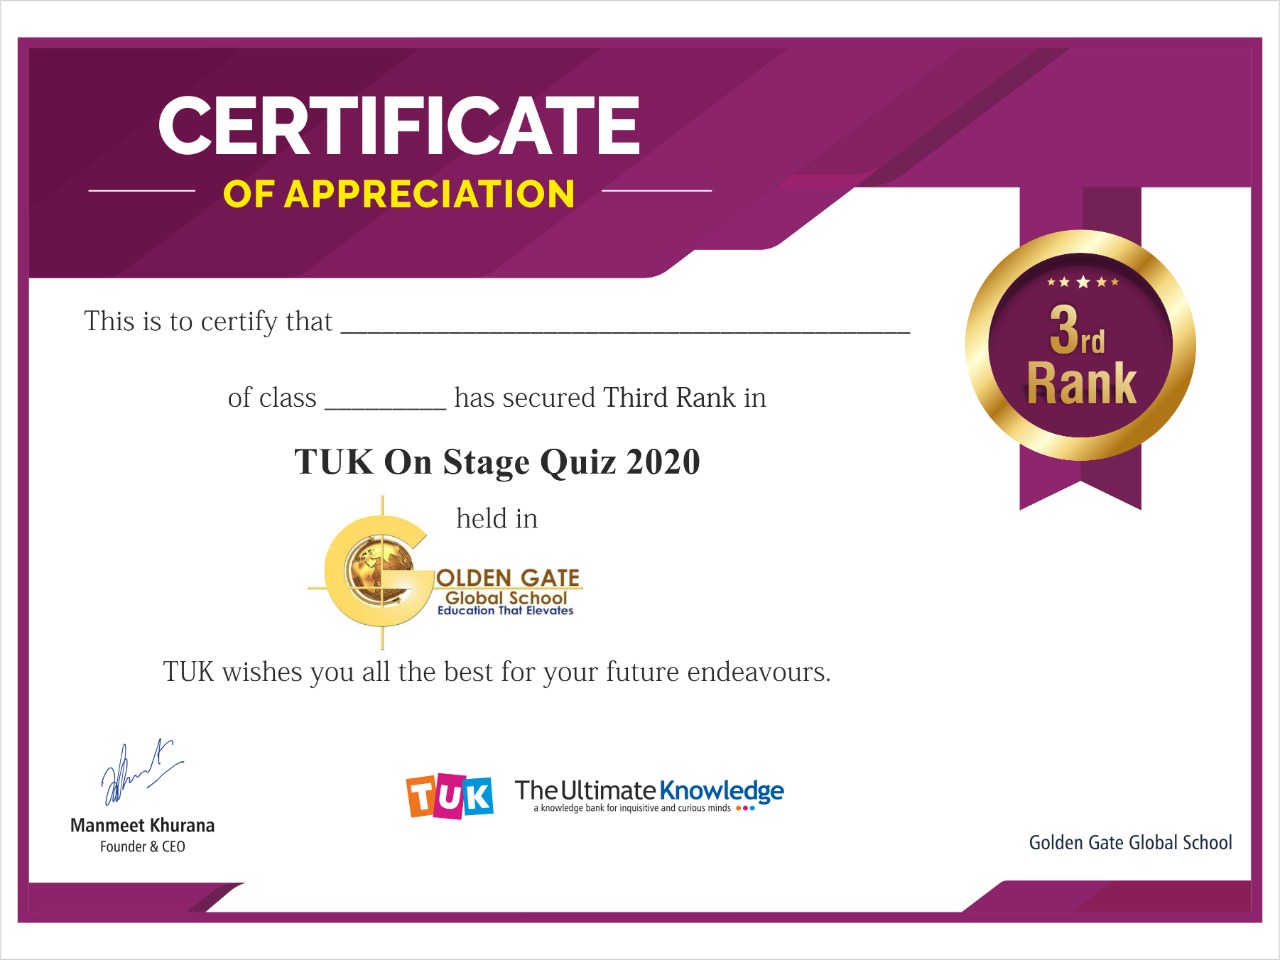 CERTIFICATE

OF APPRECIATION

 

This is to certify that

of class has secured Third Rank in

TUK On Stage Quiz 2020

held in

ER
Ga OLDEN GATE
~~

Global School
uc anon That frevoles

TUK wishes you all the best for your future endeavours.

¥ ma The Ultimate Knowledge
Manmeet Khurana
Founce: &amp; (0 Golden Gate Global Schoo!